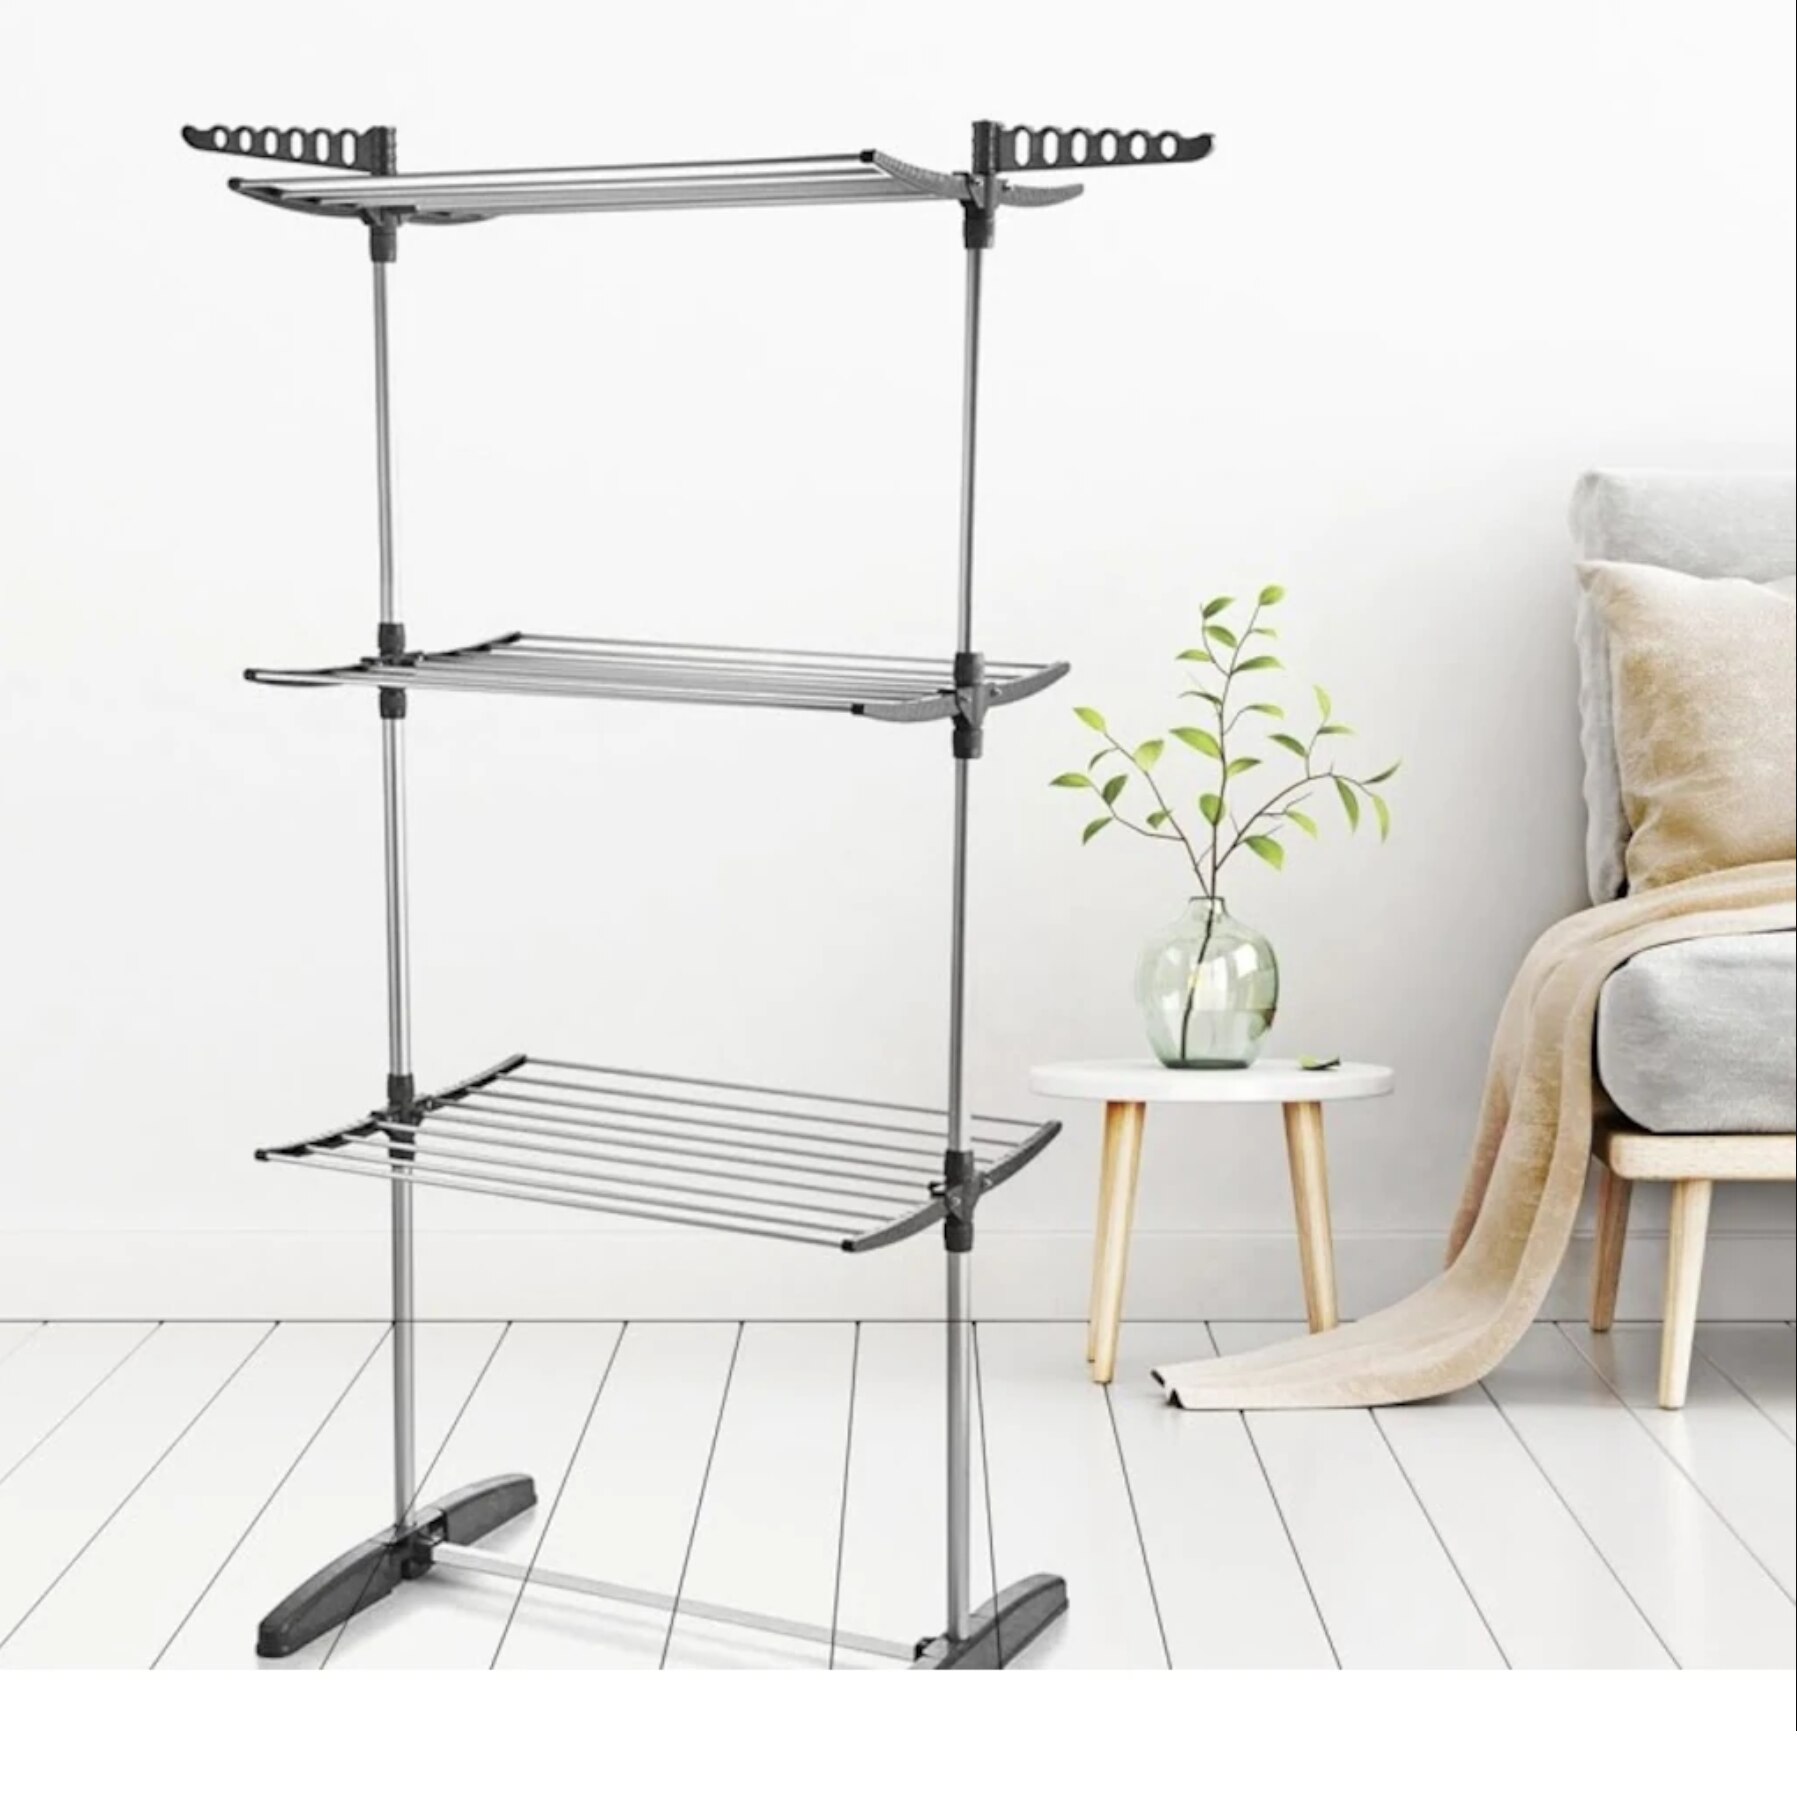 3 Layers Clothes Drying Rack Laundry Rack Folding Clothes Hanger Shoes Rack Stainless Clothes Organizer Hanger-MADE IN TURKEY